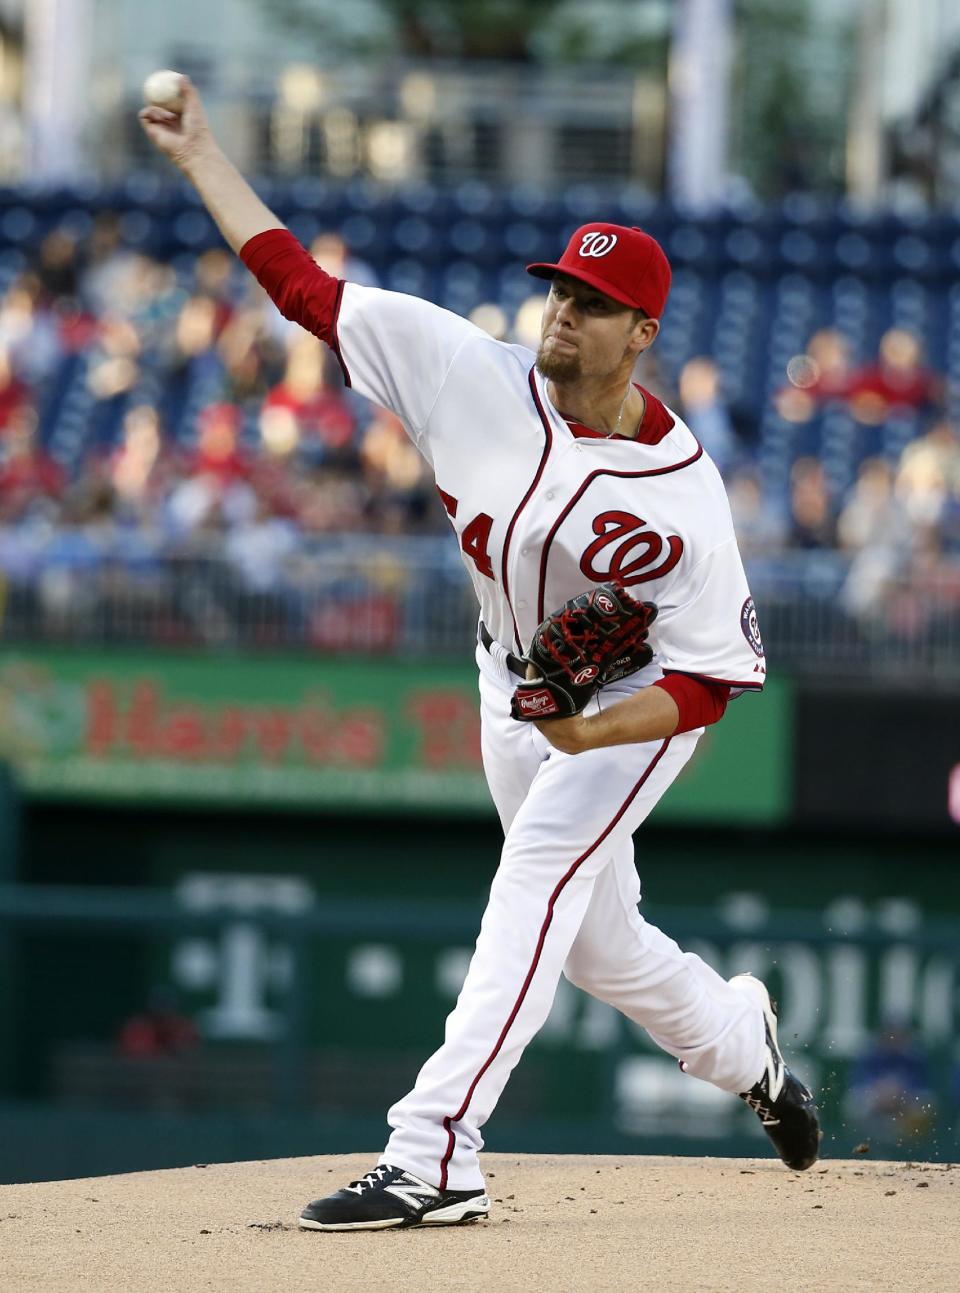 CORRECTS TO STARTER, NOT RELIEF - Washington Nationals starter pitcher Blake Treinen throws during the first inning of a baseball game against the Los Angeles Dodgers at Nationals Park, Tuesday, May 6, 2014, in Washington. He was promoted from Triple-A Syracuse to start the game. (AP Photo/Alex Brandon)